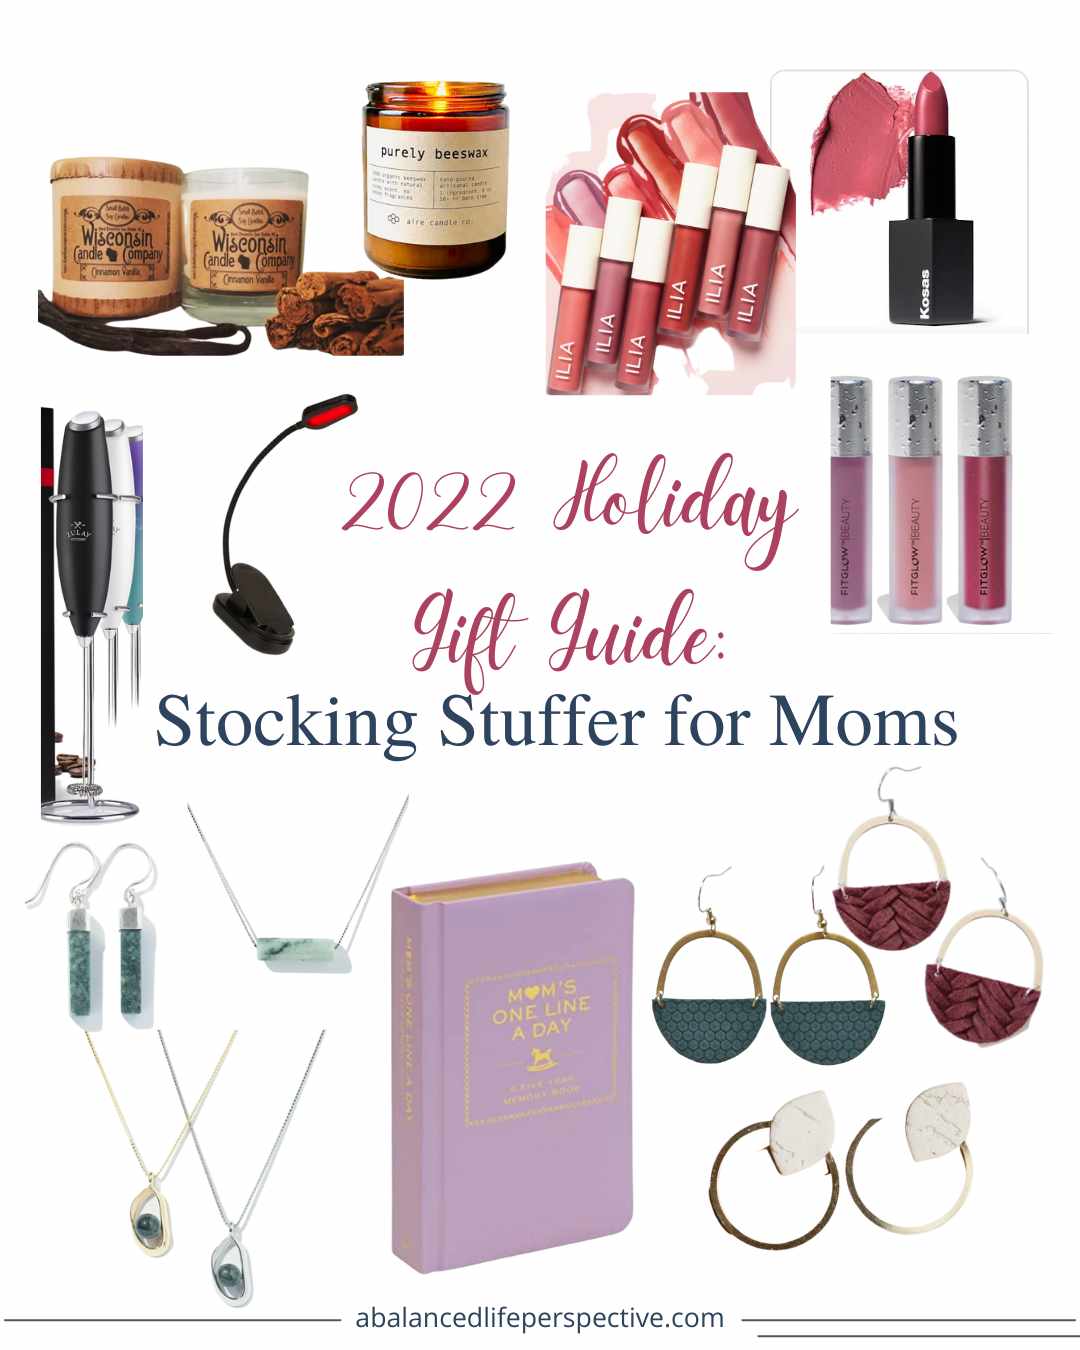 The Perfect Stocking Stuffer for Mom, Holidays